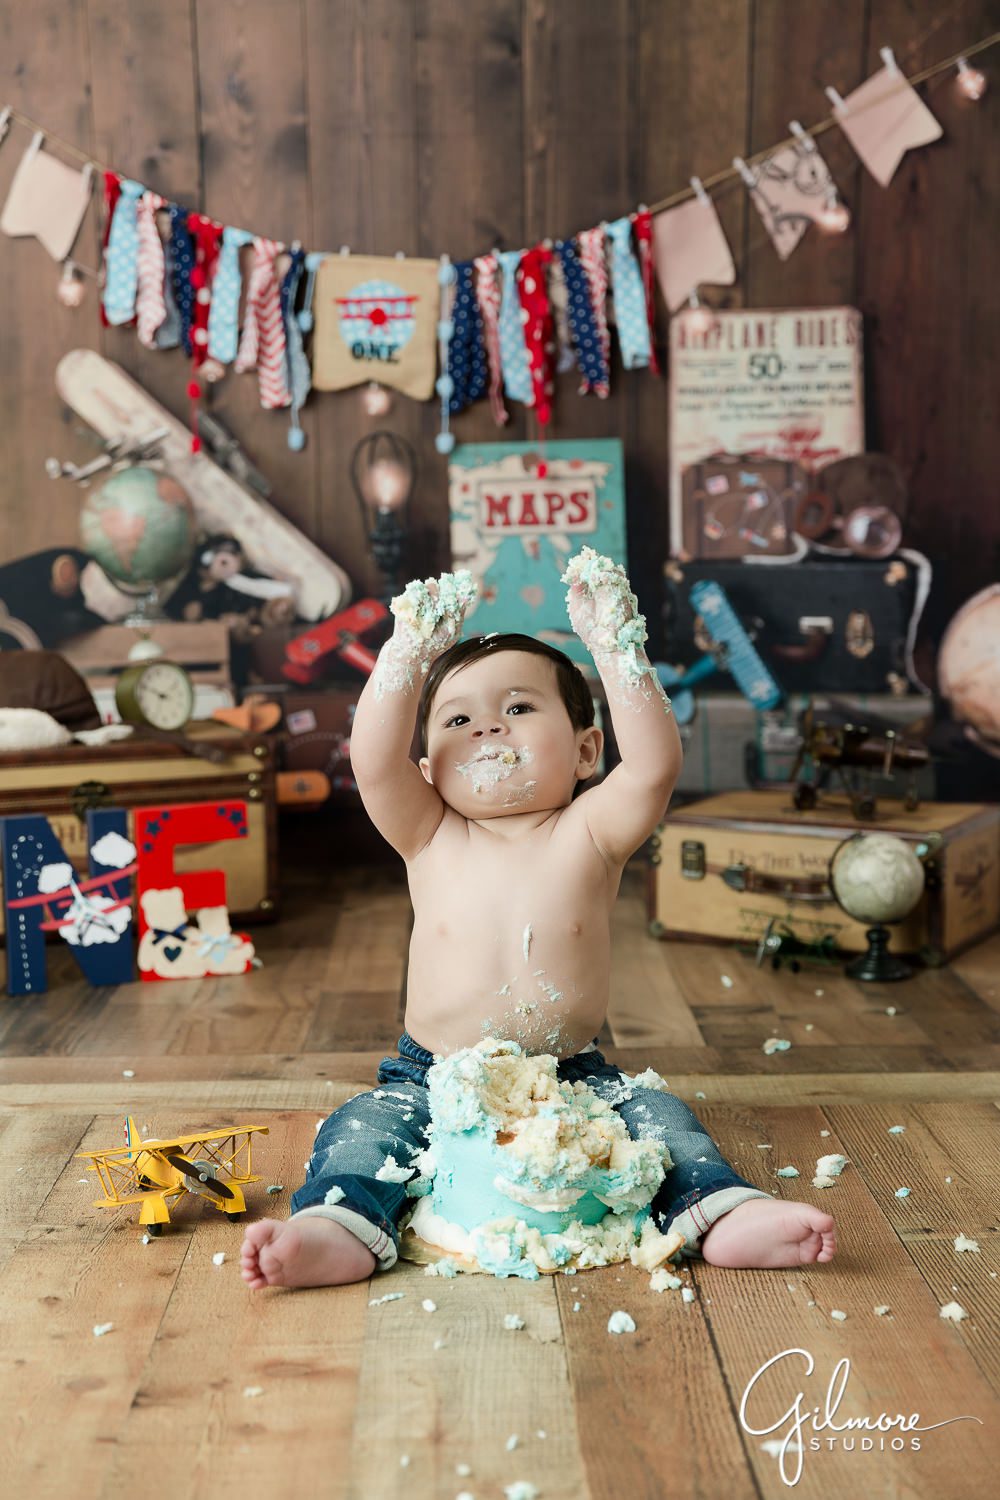 Aviator Cake Smash - Time Flies 1st Birthday Session, clouds, blue sky, biplane, airplanes, one year old, props, backdrop, design